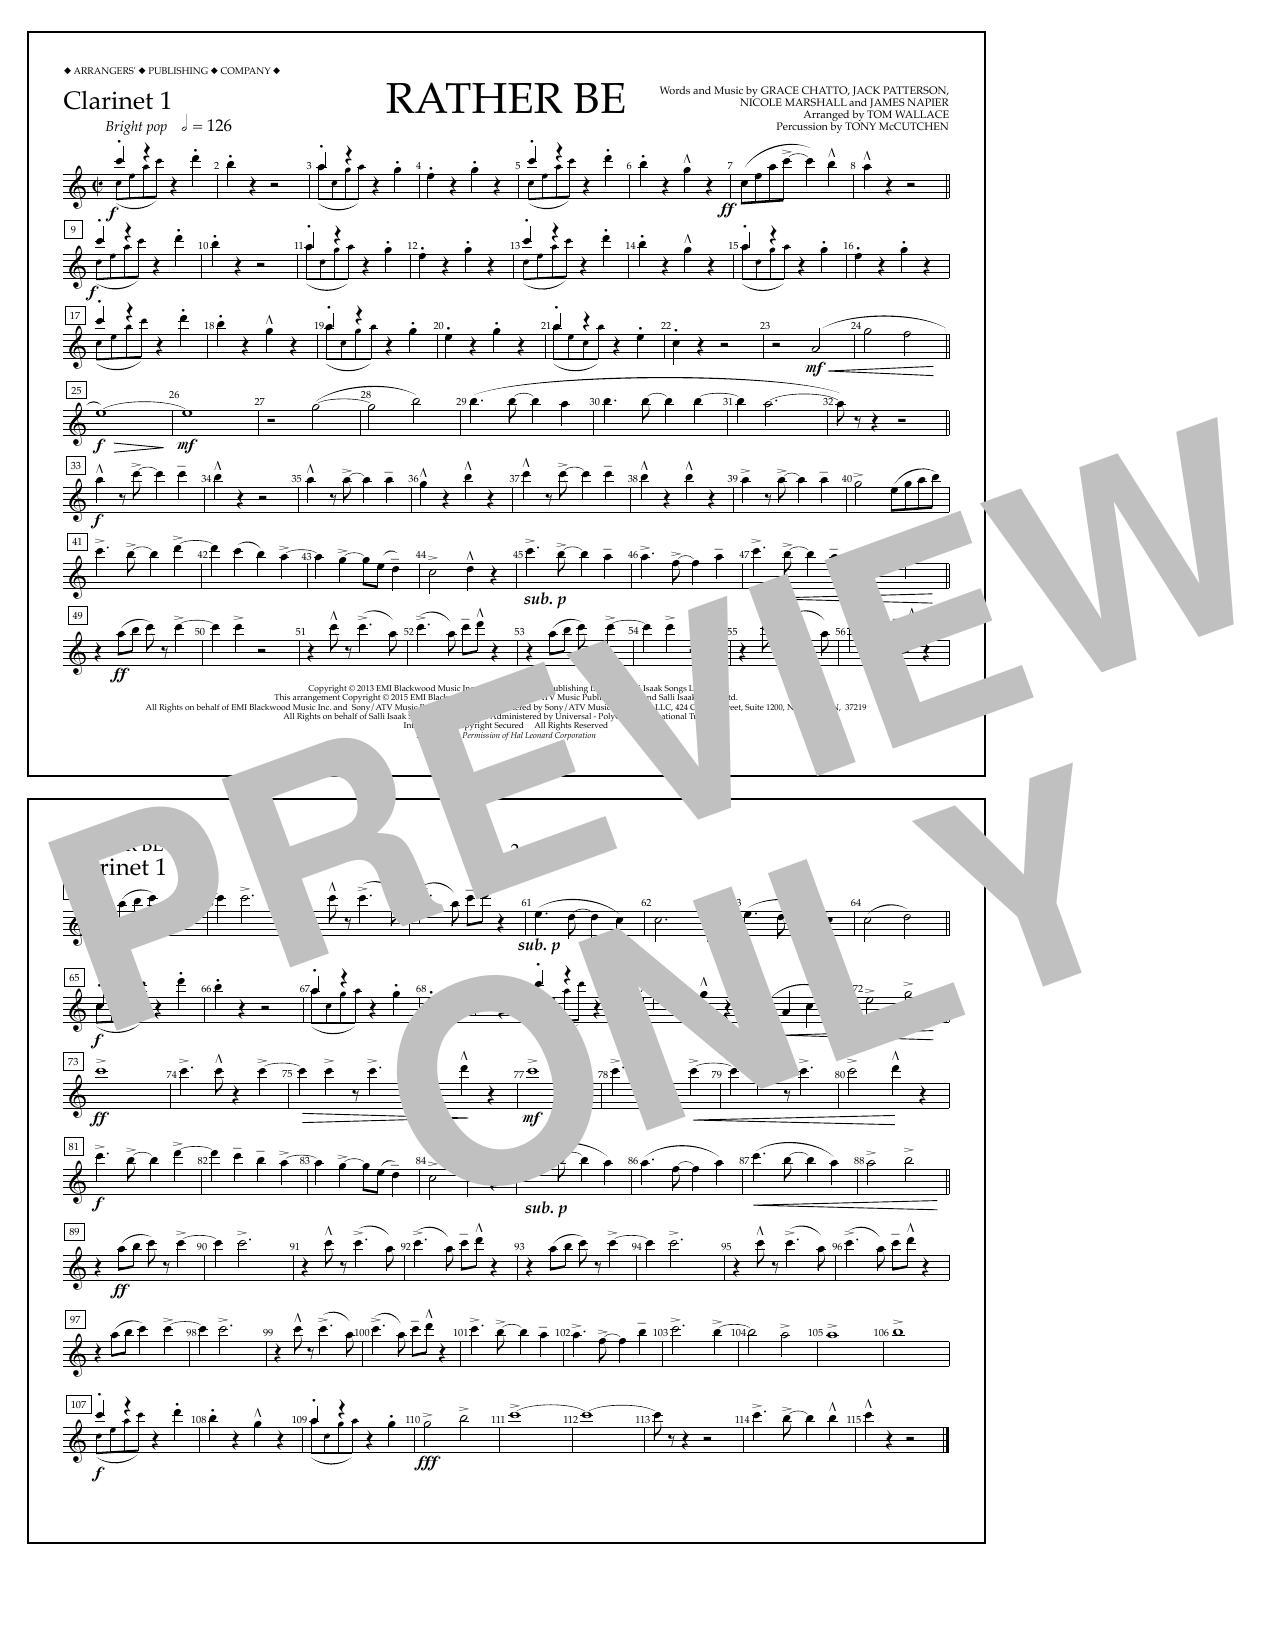 Download Tom Wallace Rather Be - Clarinet 1 Sheet Music